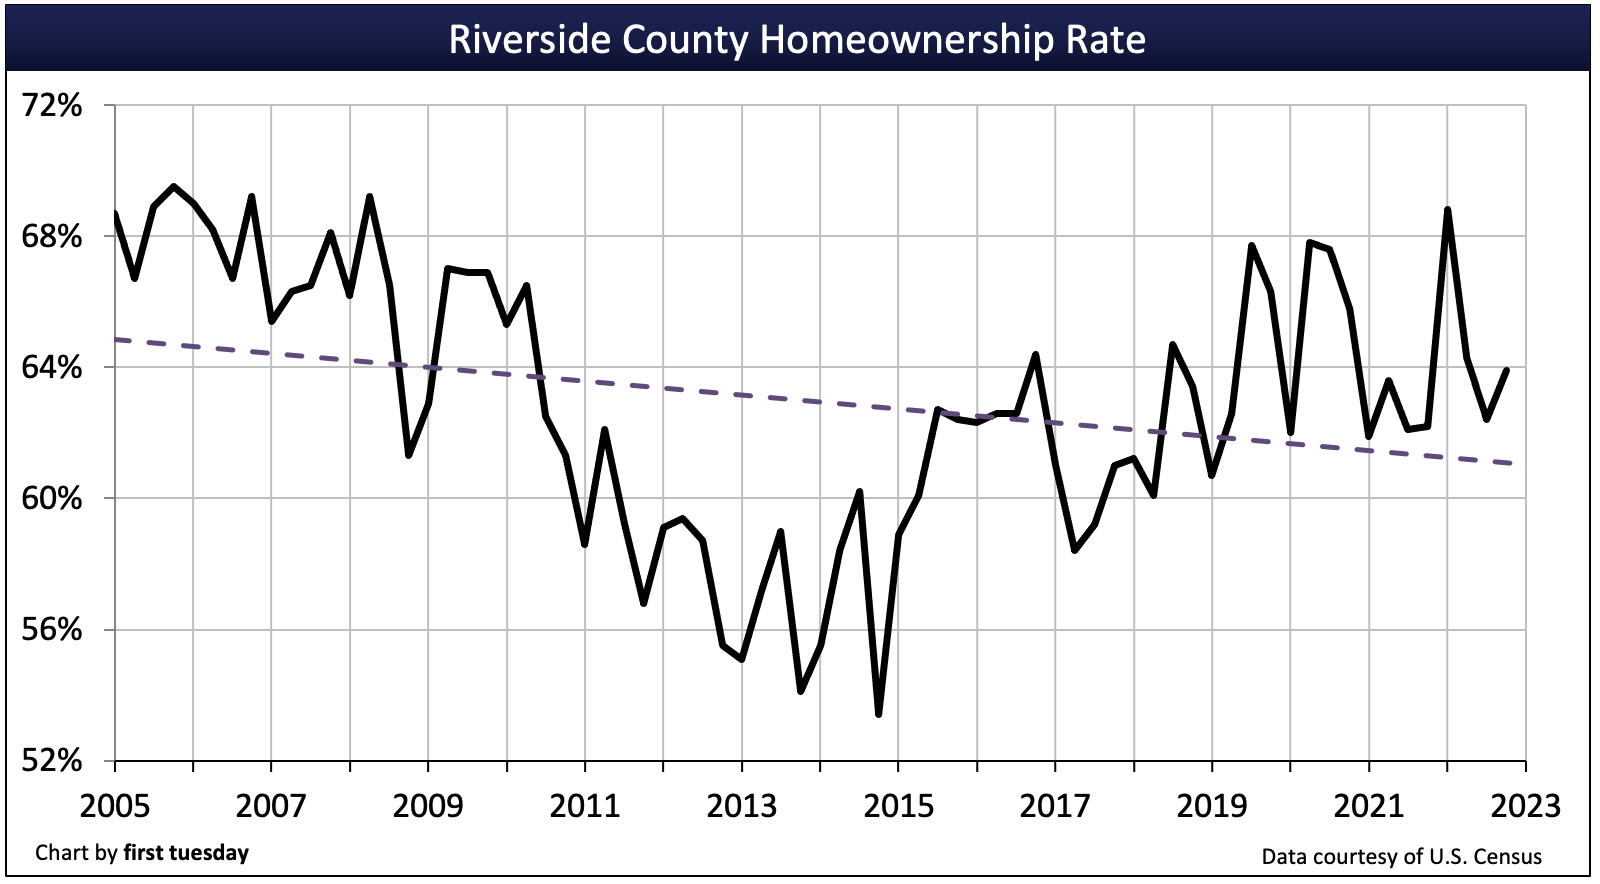 This line chart displays the homeownership rate for Riverside County.